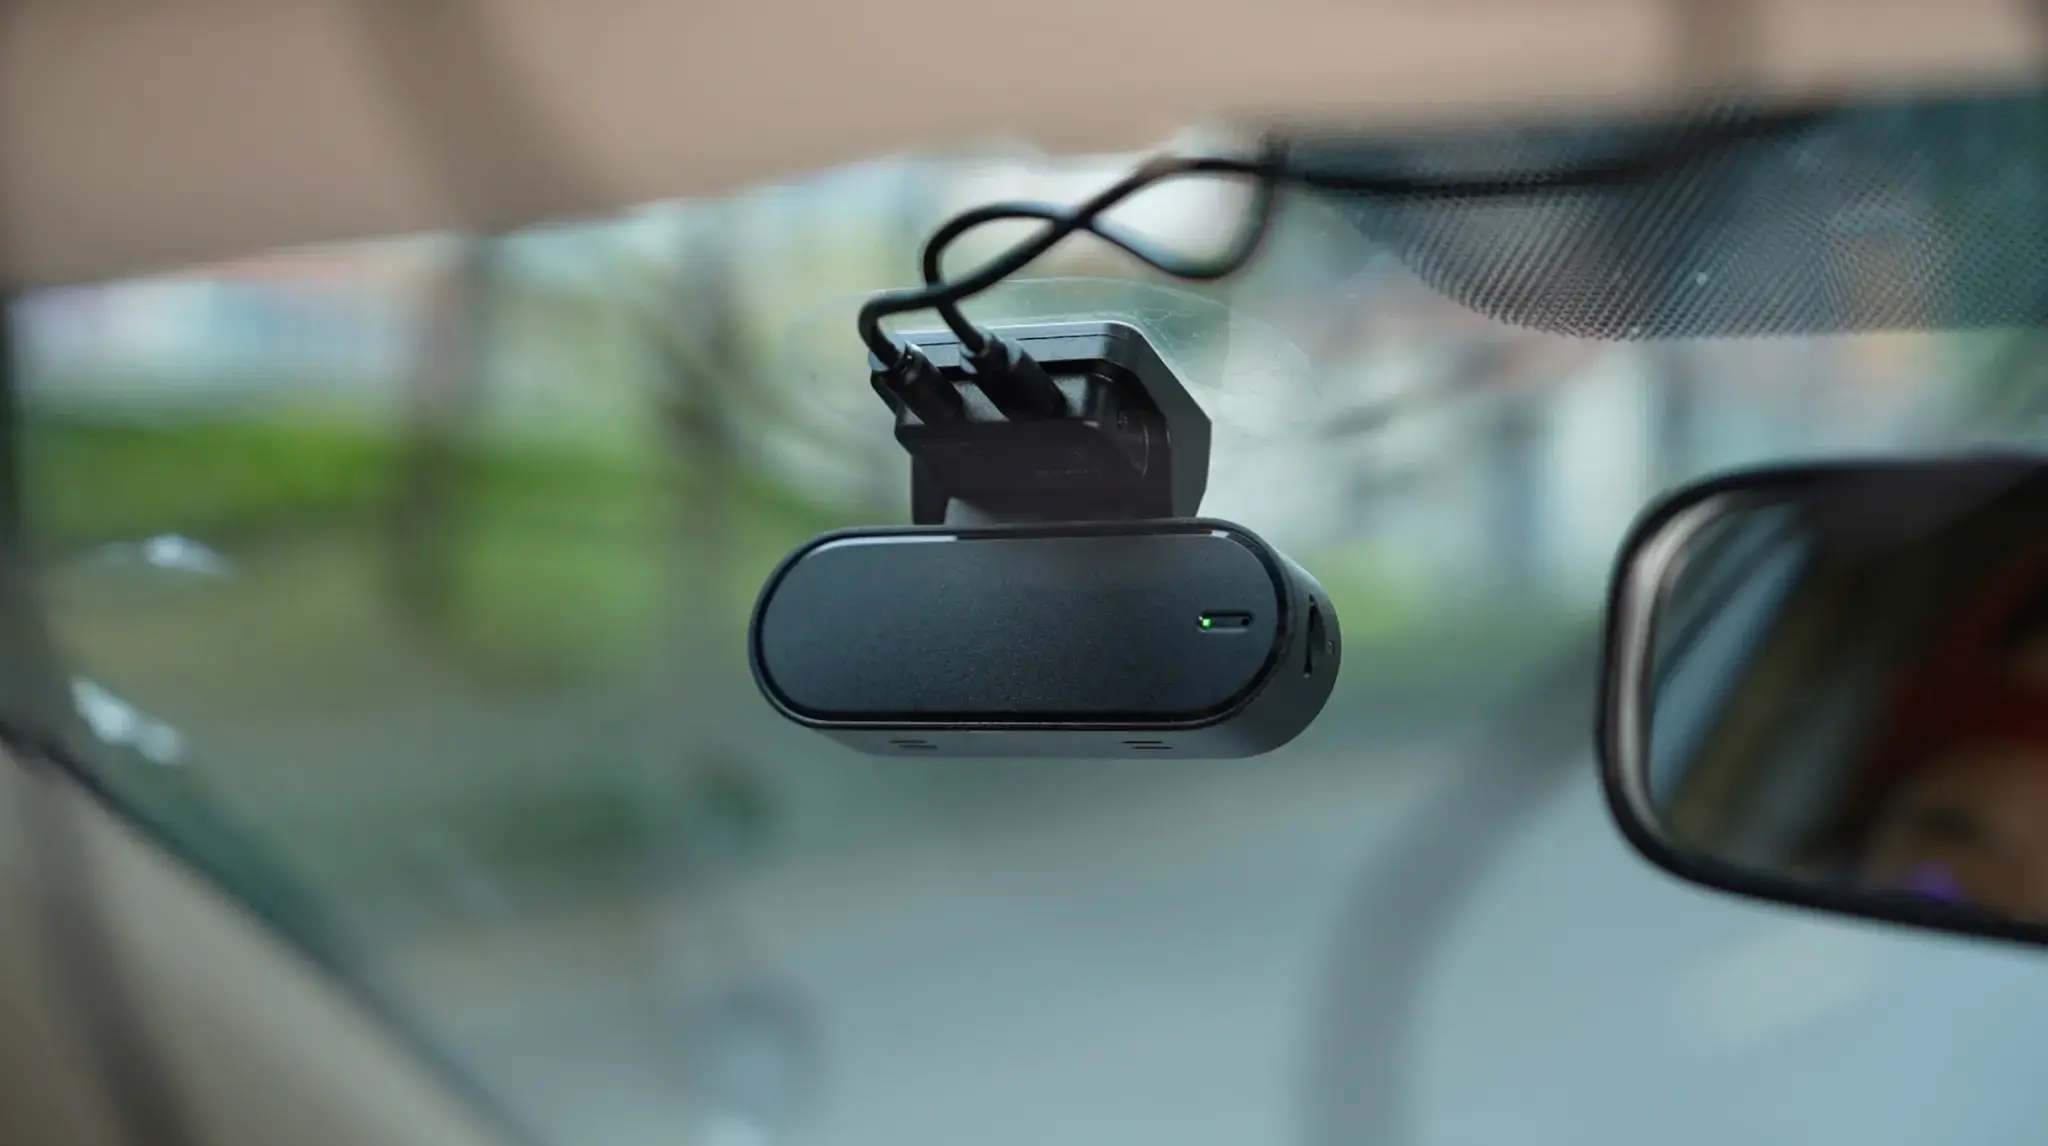 DDPAI N5 Dual 4K dash cam mounted on car front windshield capturing the road view.